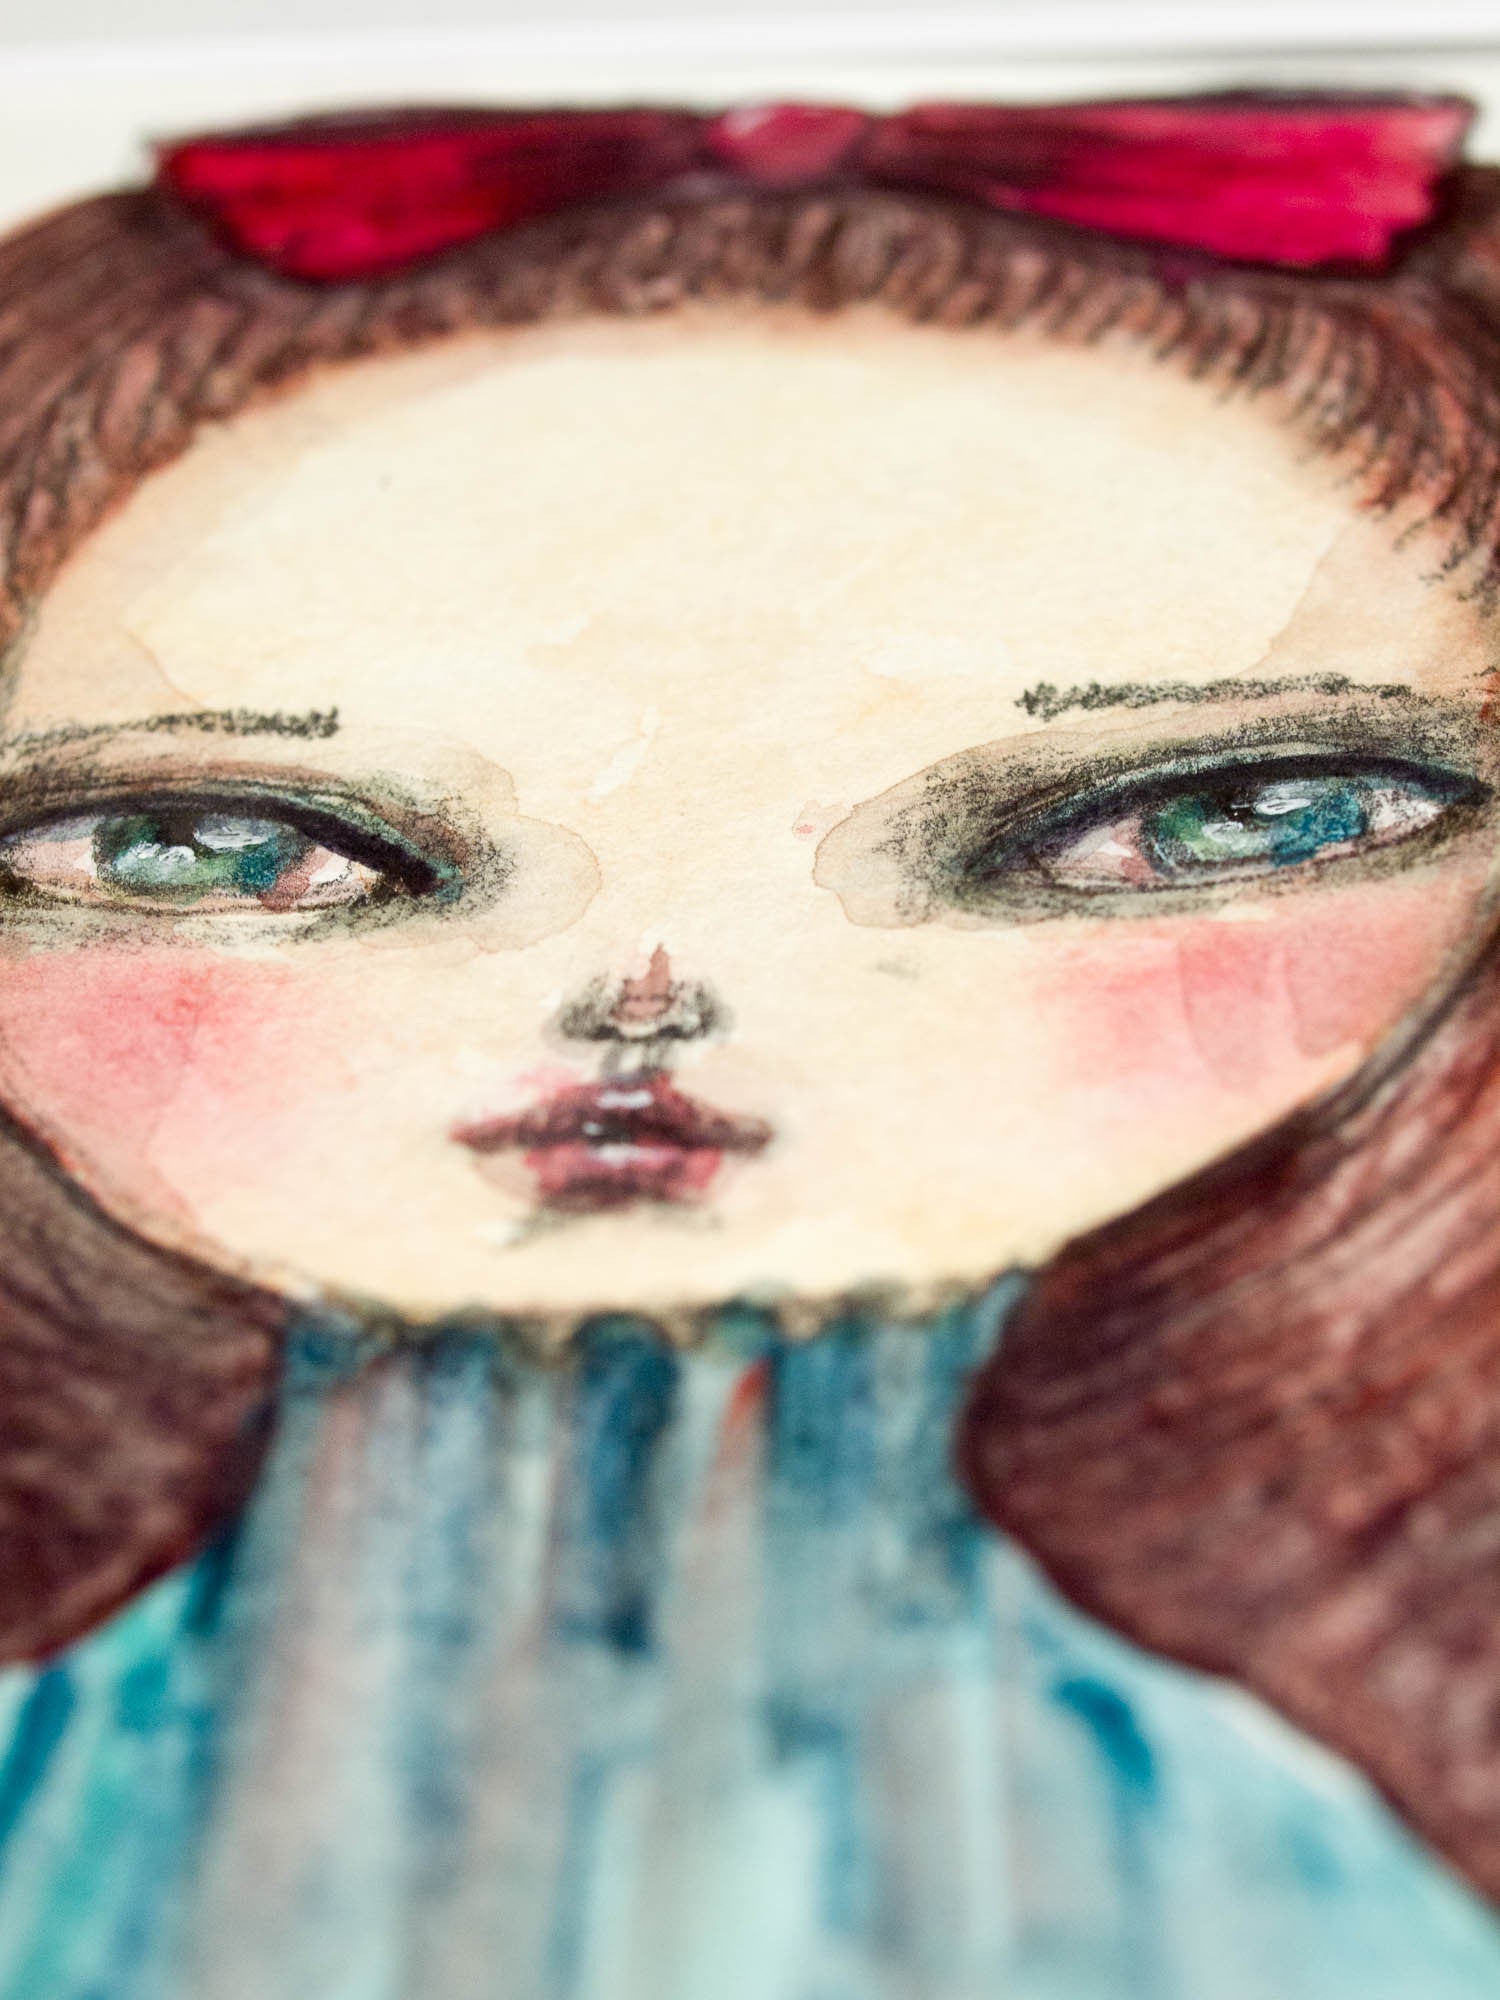 Watercolors and experimentation make fresh and beautiful additions to Danita's growing collection of original paintings, with beautiful surreal eyes and faces.